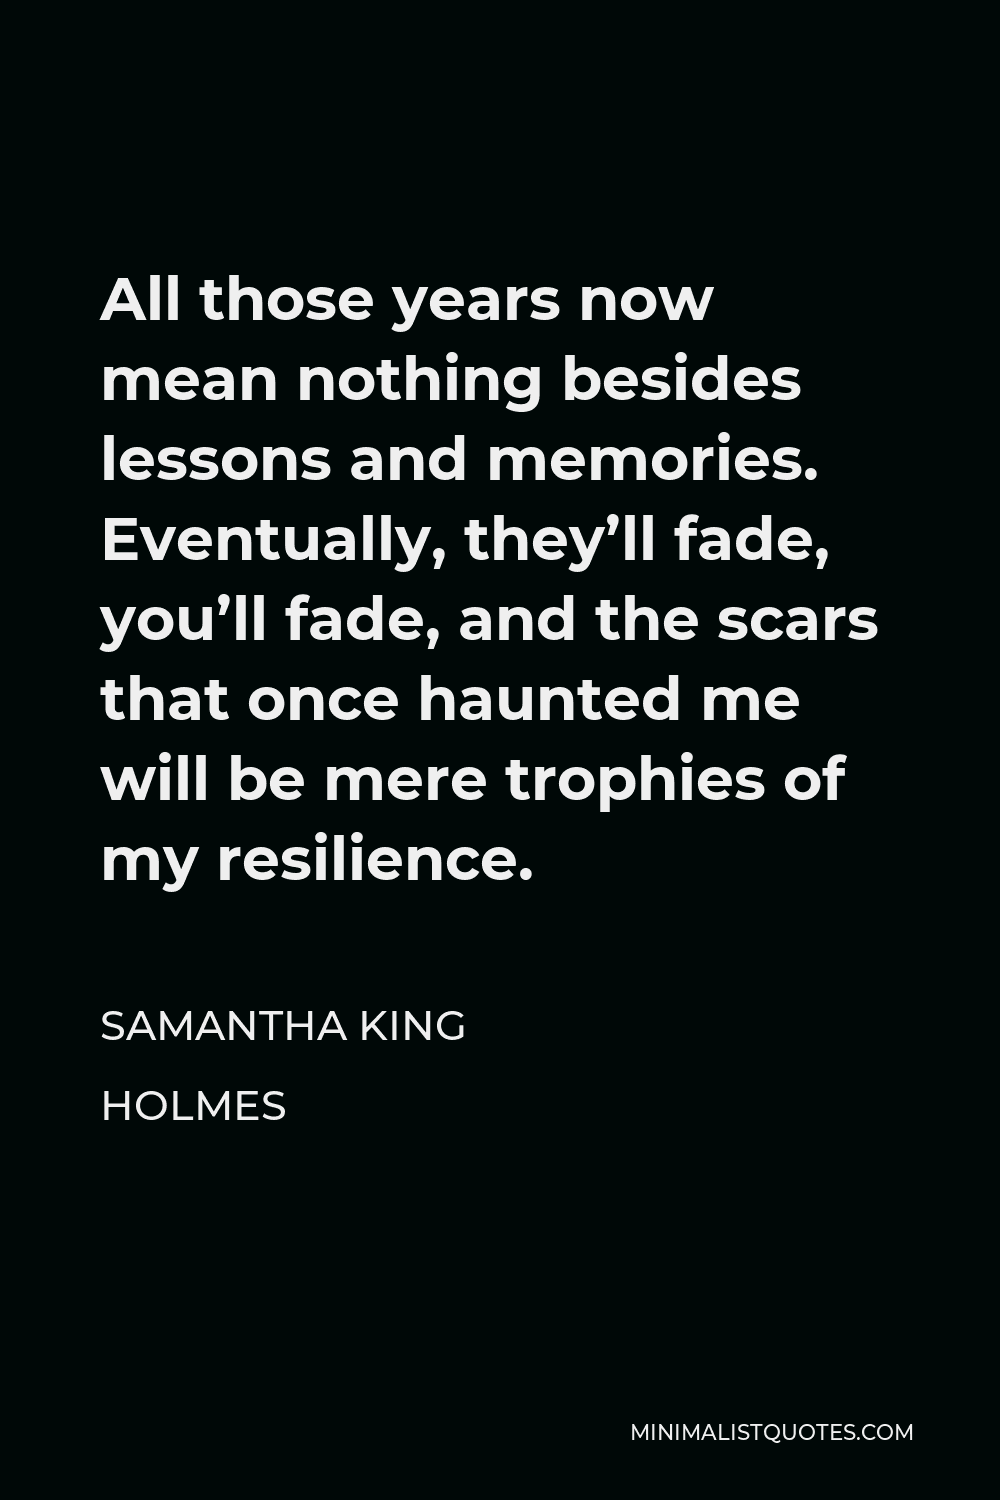 Samantha King Holmes Quote - All those years now mean nothing besides lessons and memories. Eventually, they’ll fade, you’ll fade, and the scars that once haunted me will be mere trophies of my resilience.